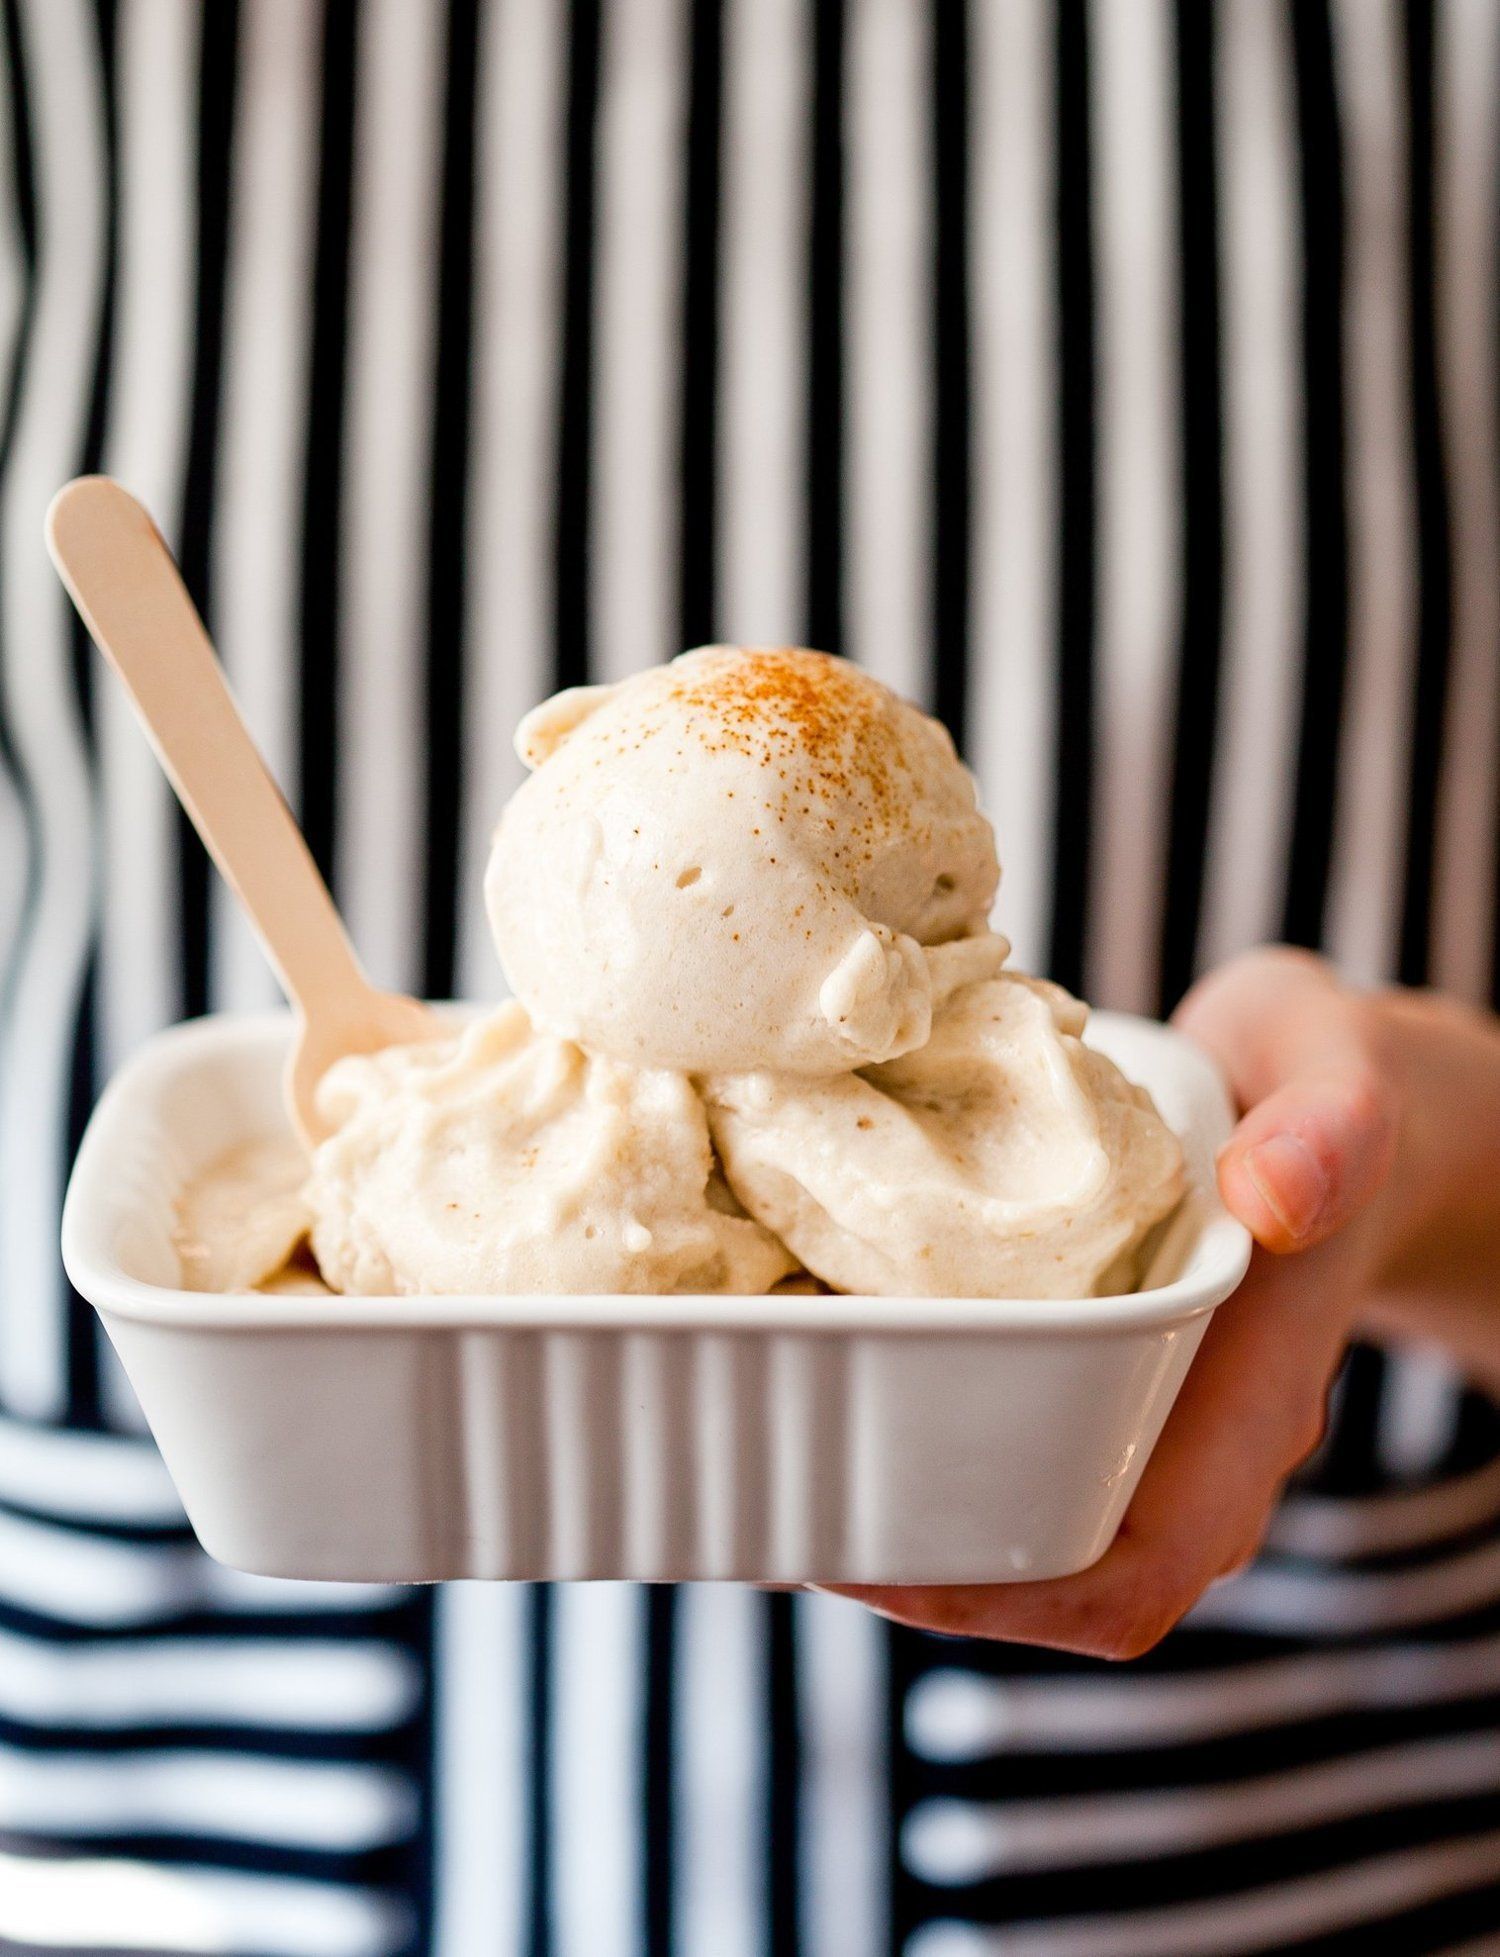 Frozen Banana ice cream. How To Make Creamy Ice Cream with Just One Ingredient! — Cooking Lessons from The Kitchn